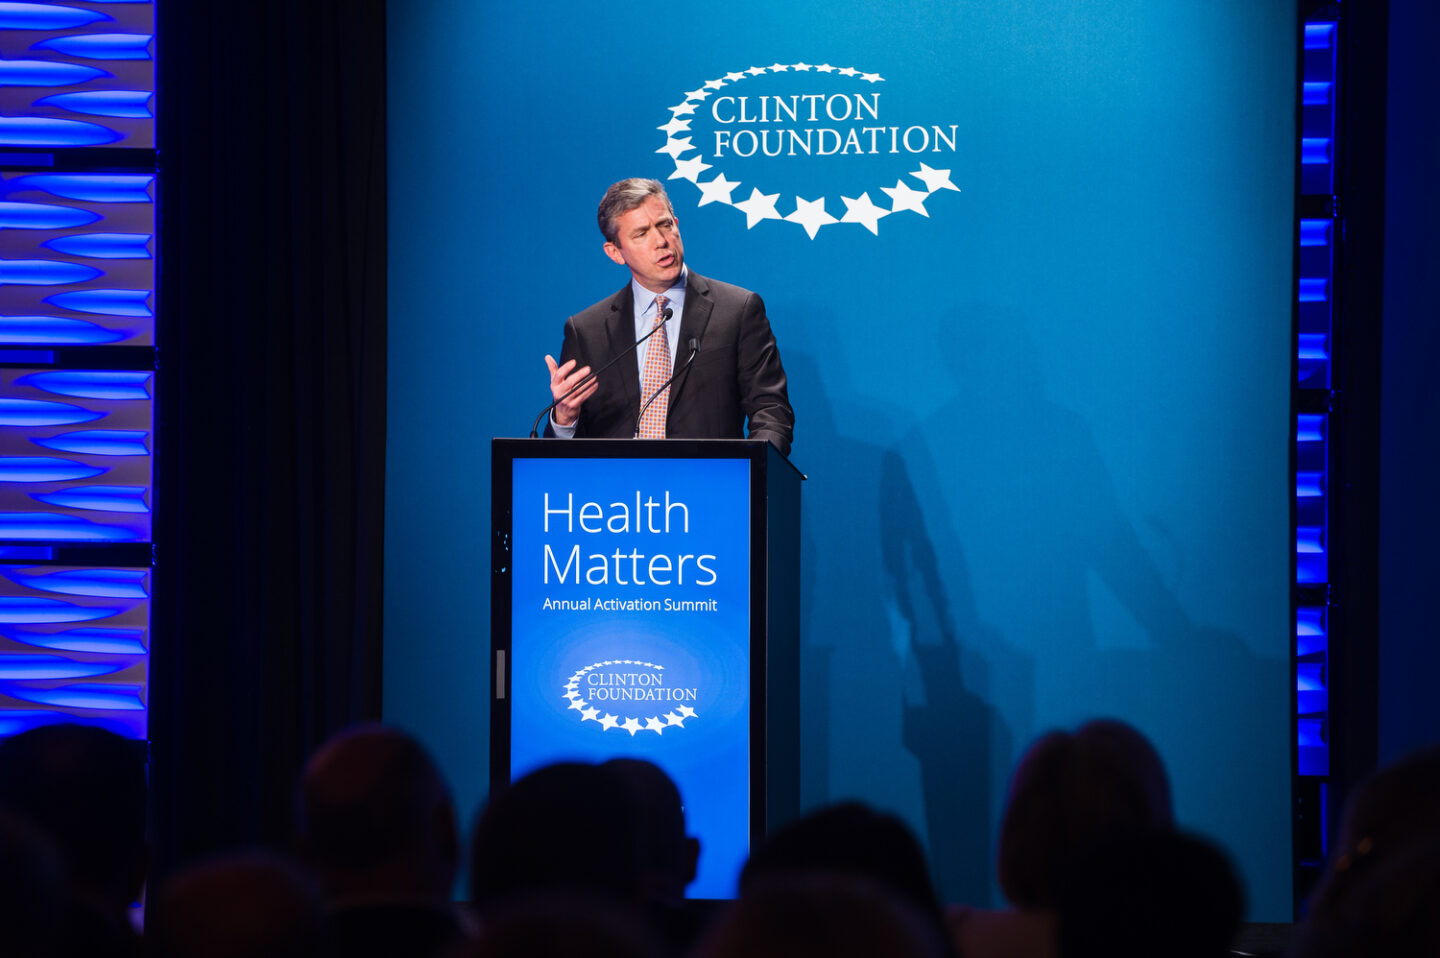 An individual speaks onstage behind a podium that says "Health Matters"